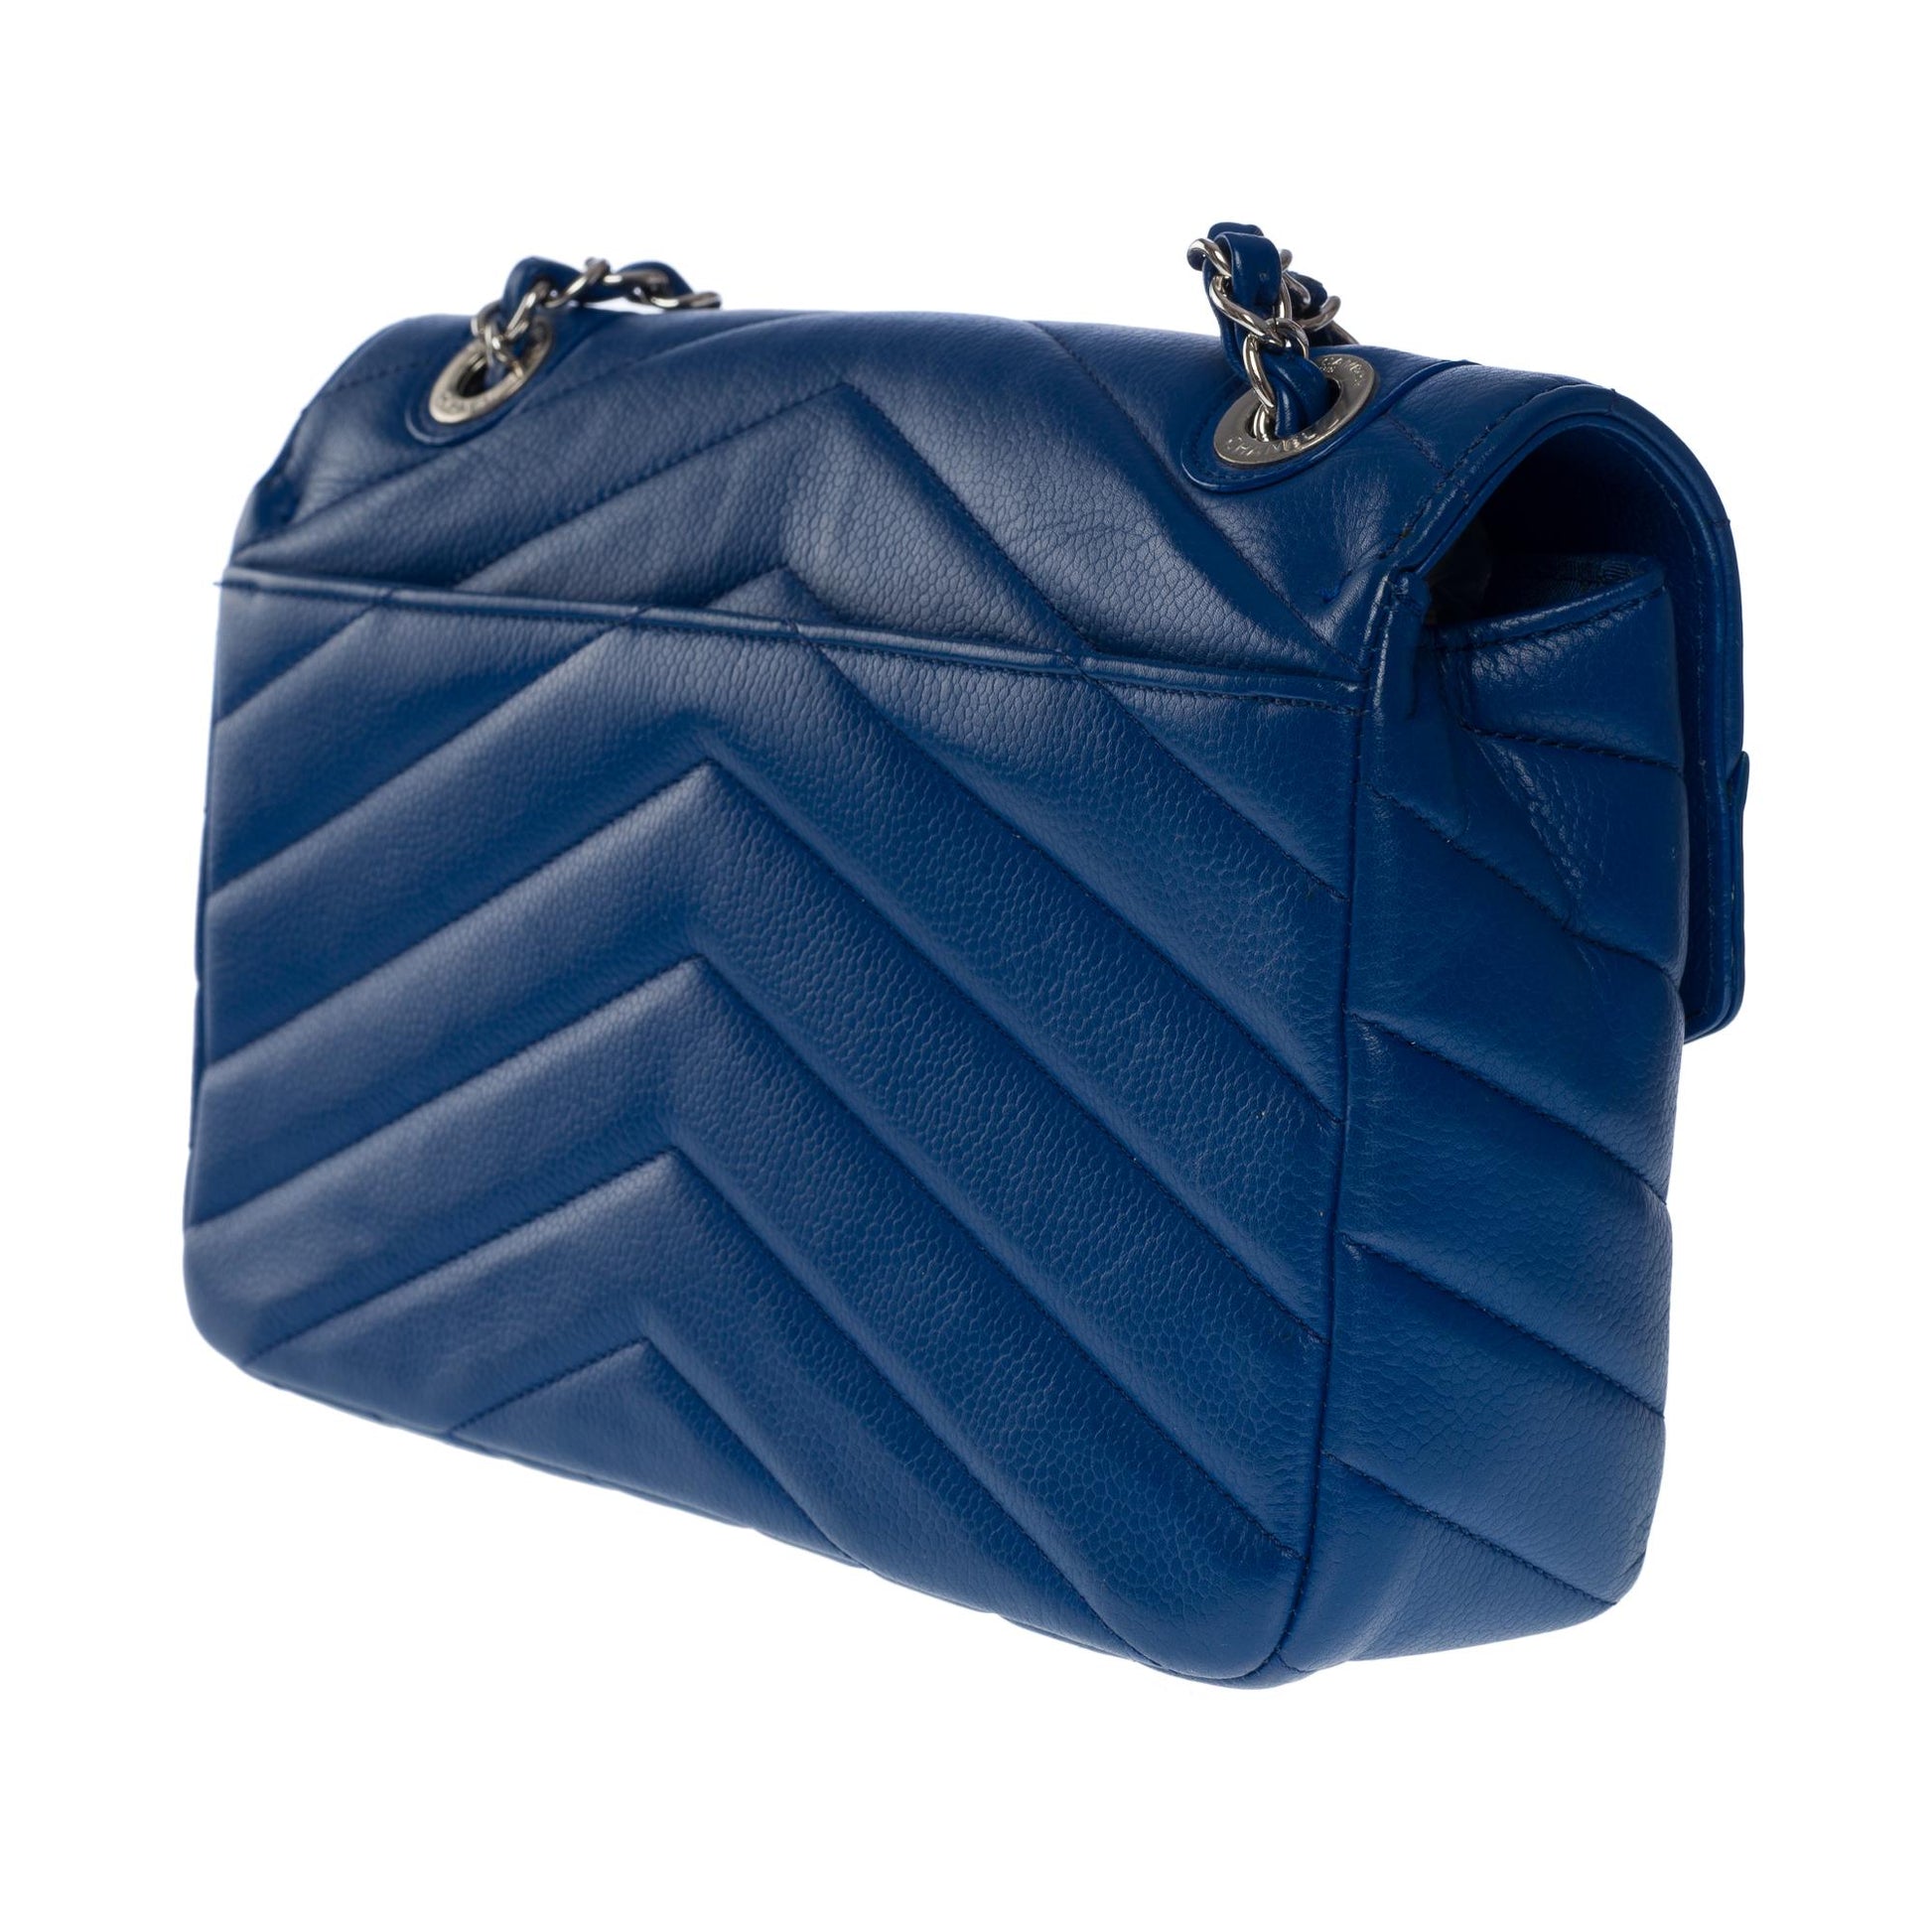 Chanel Blue Chevron Quilted Lambskin Leather Classic Medium Double